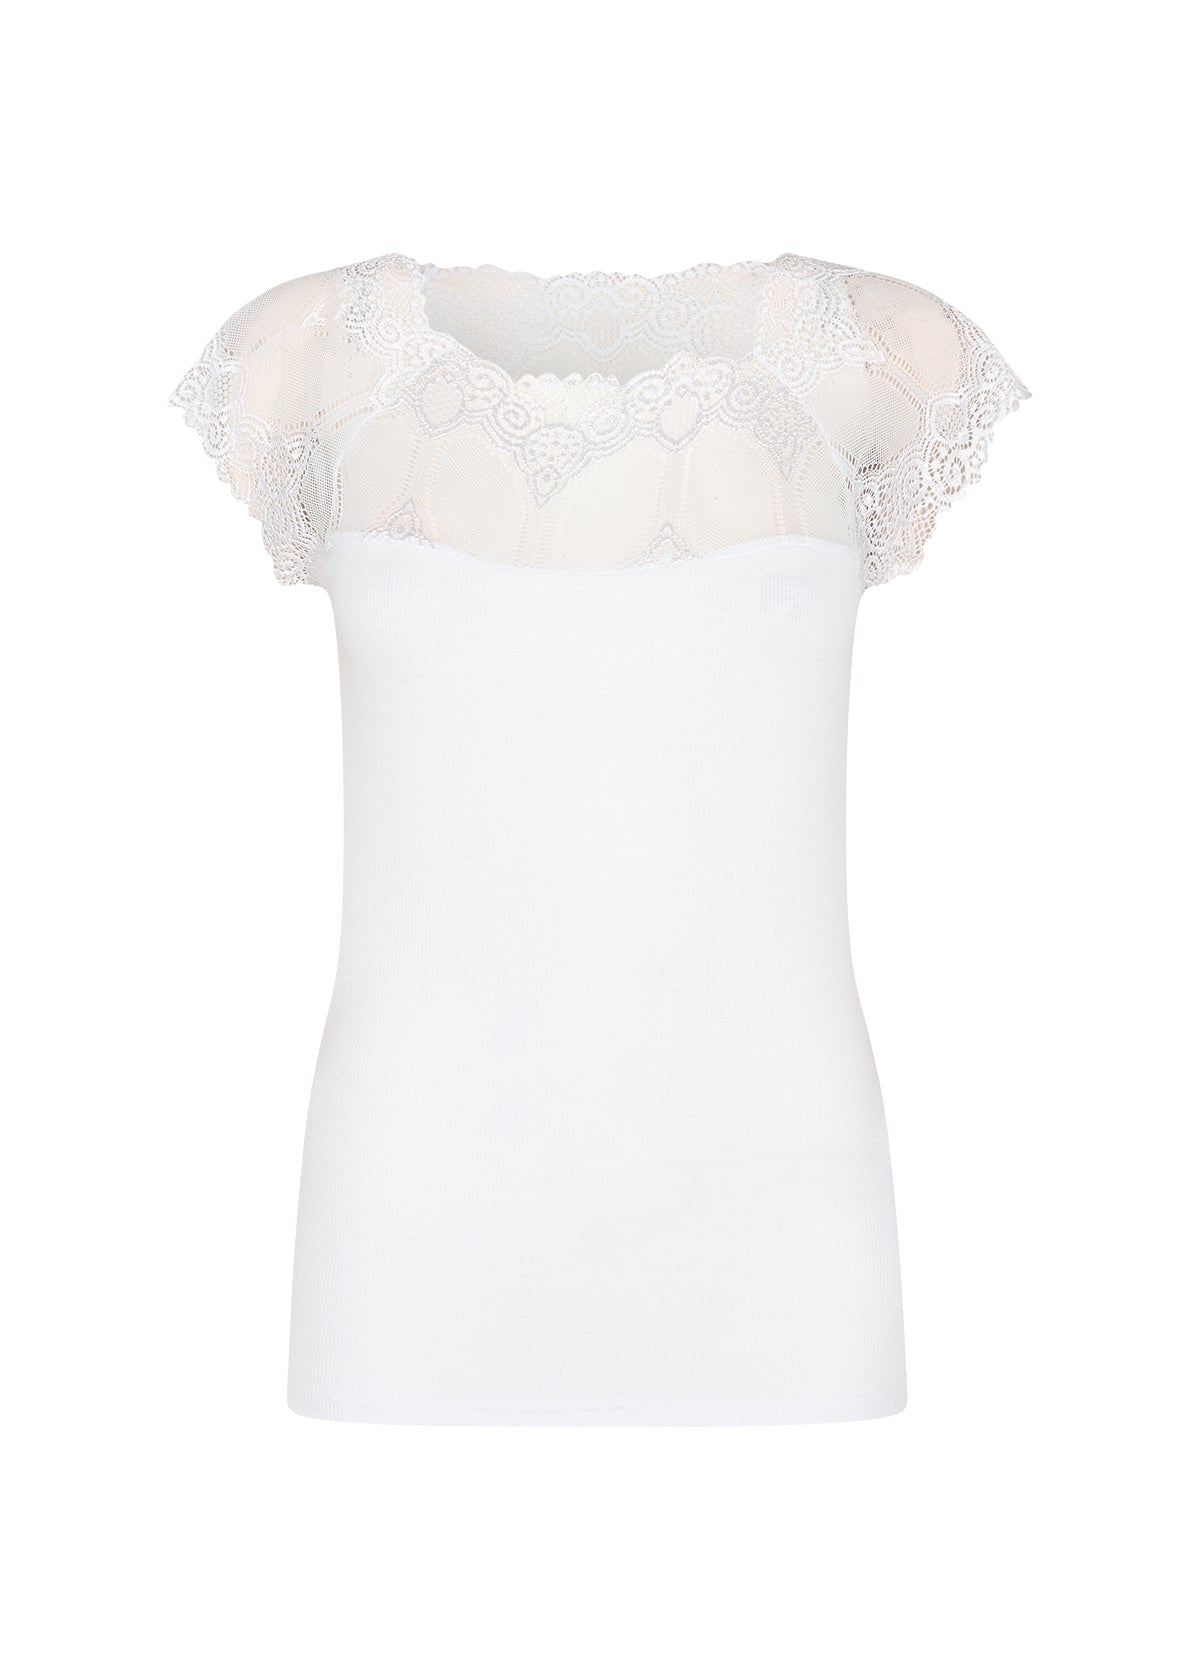 SOYA CONCEPT RYAN 5 Pure White Lace Shirt